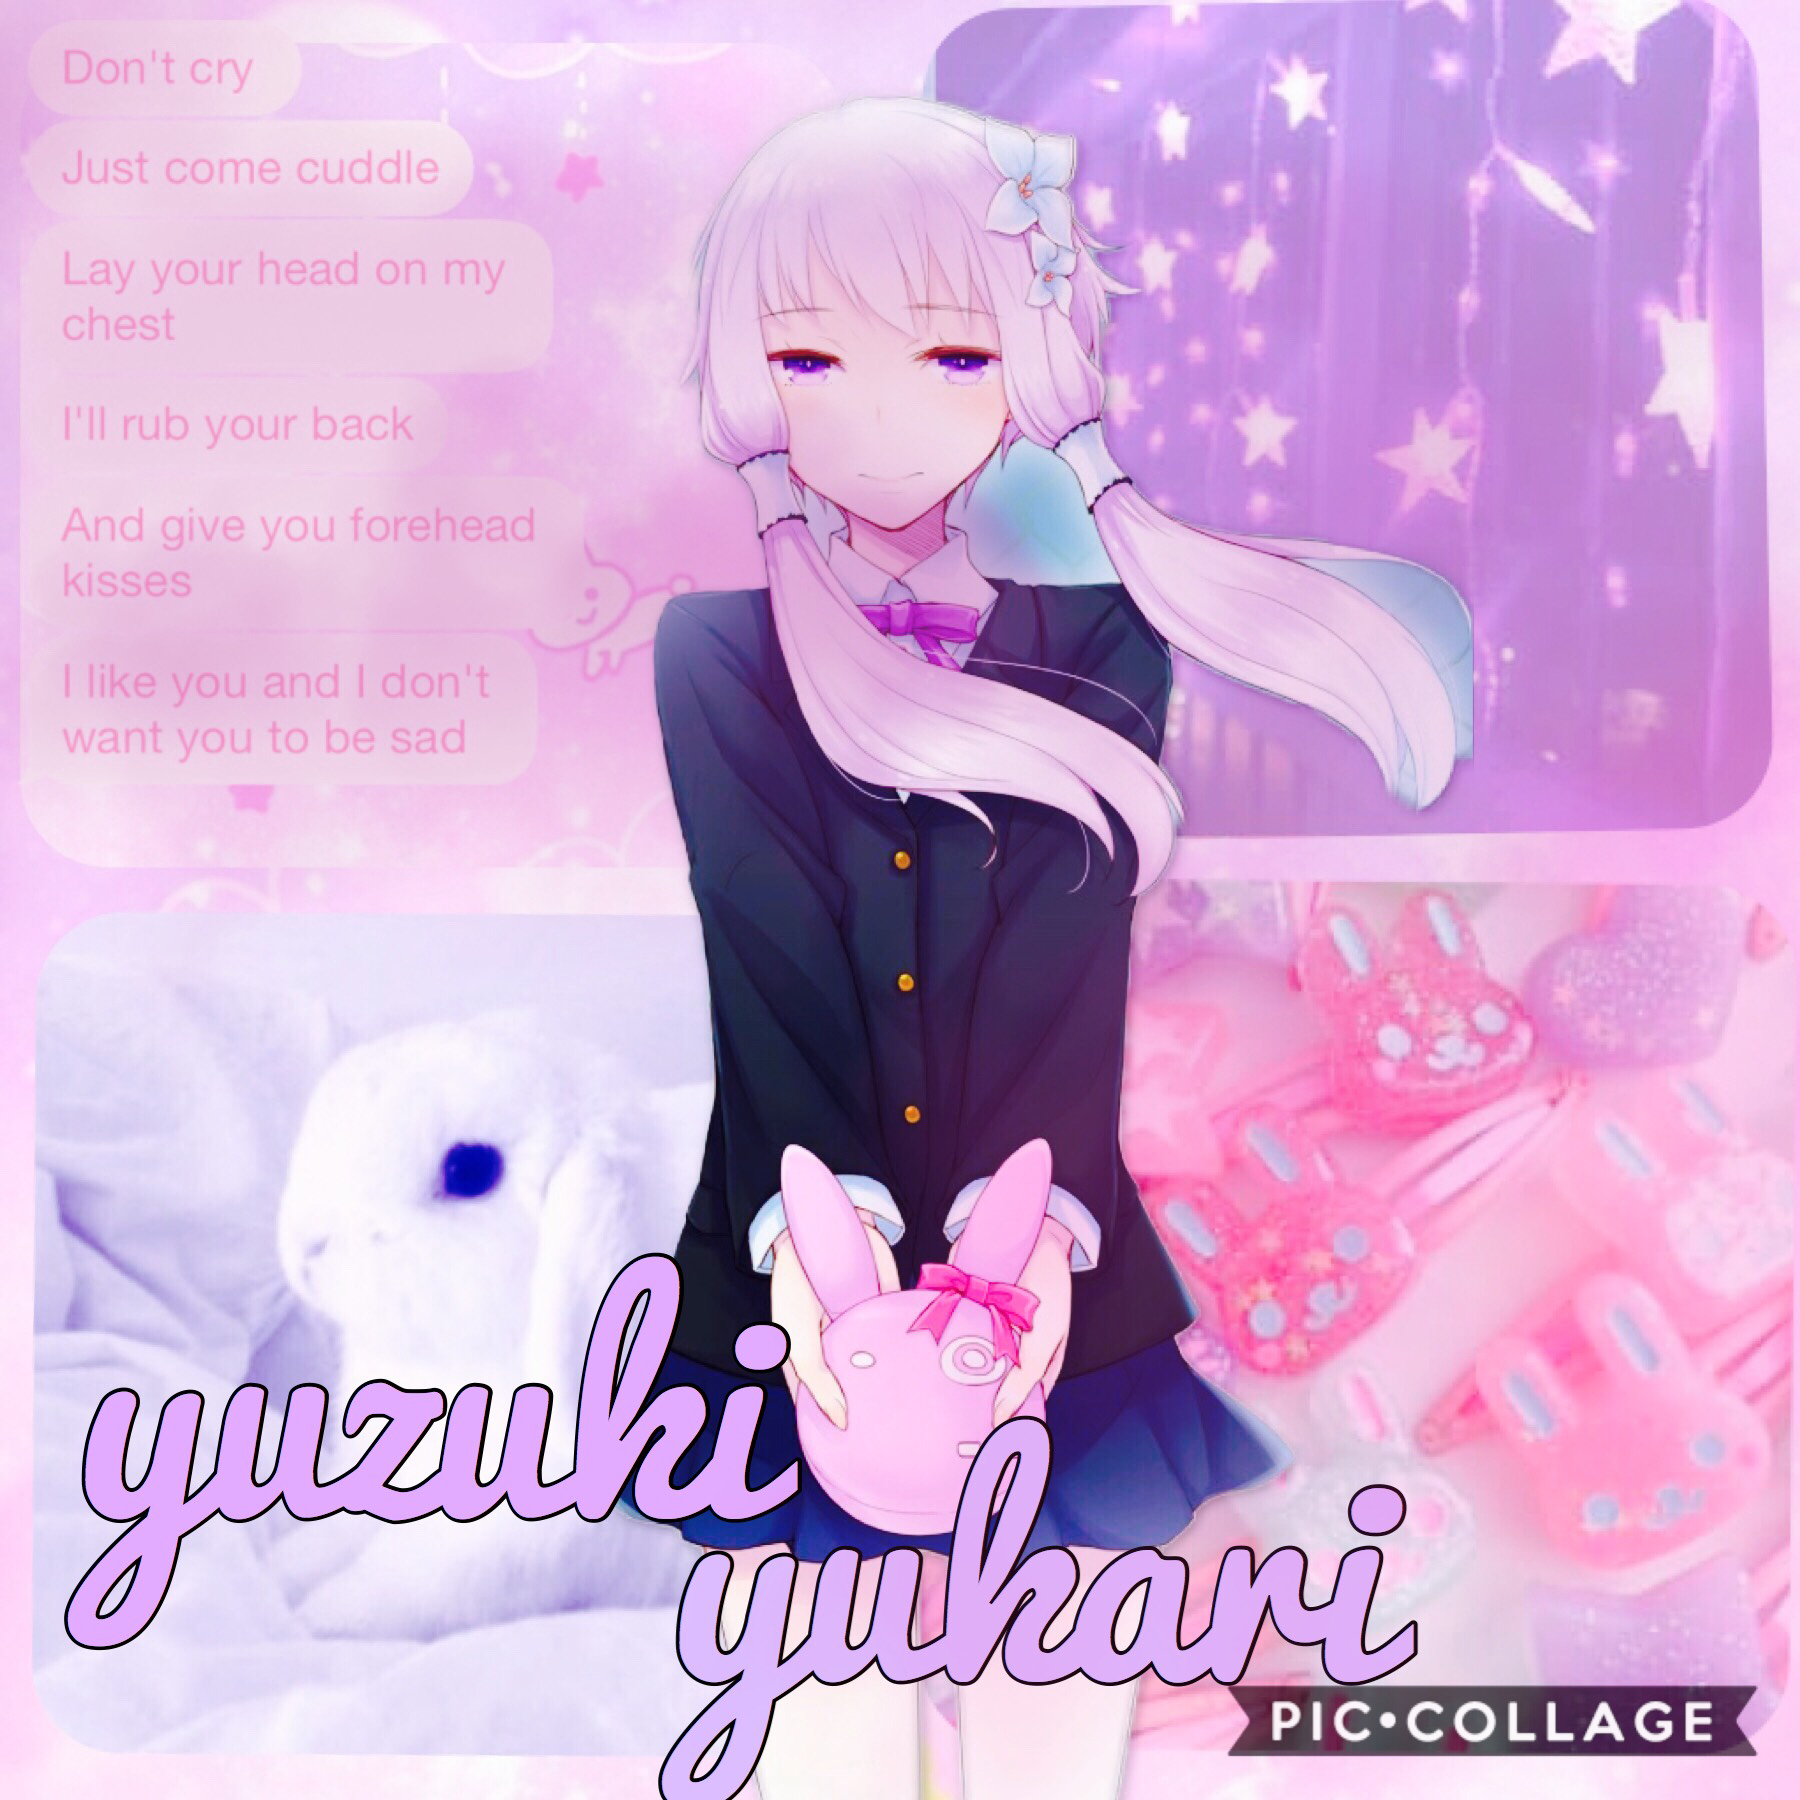 TAP  (⊃｡•́‿•̀｡)⊃━☆ﾟ.*･｡ﾟ
Some people might be wondering why I keep making Yuzuki Yukari edits. The only answer I can give is because she is a precious cinnamon roll that must be protected. Also I’ve had this for a while and am thinking of things to post s